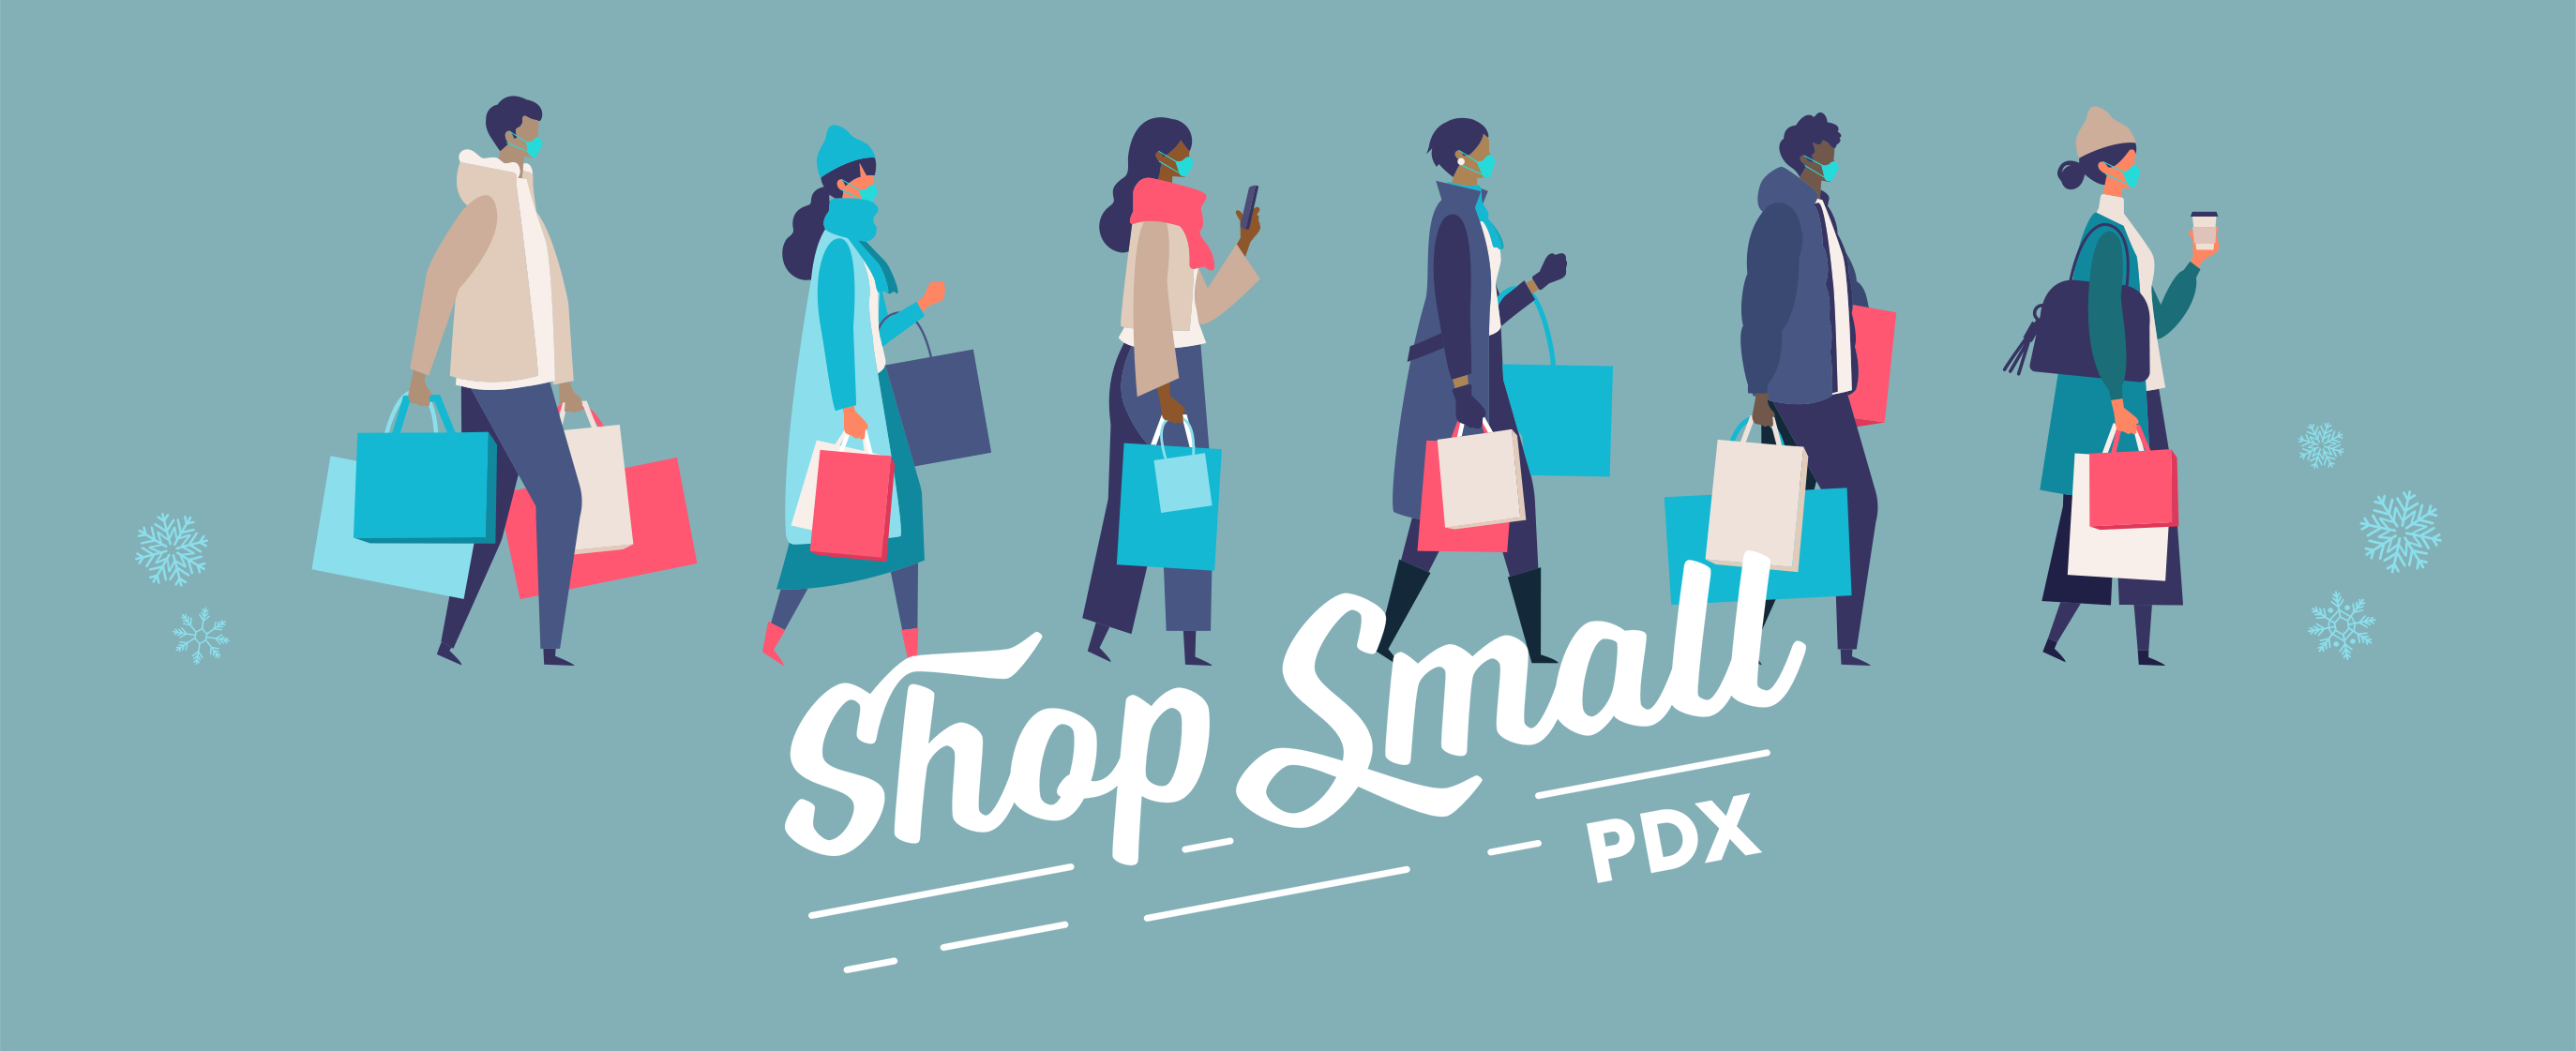 Shop Small PDX - people shopping